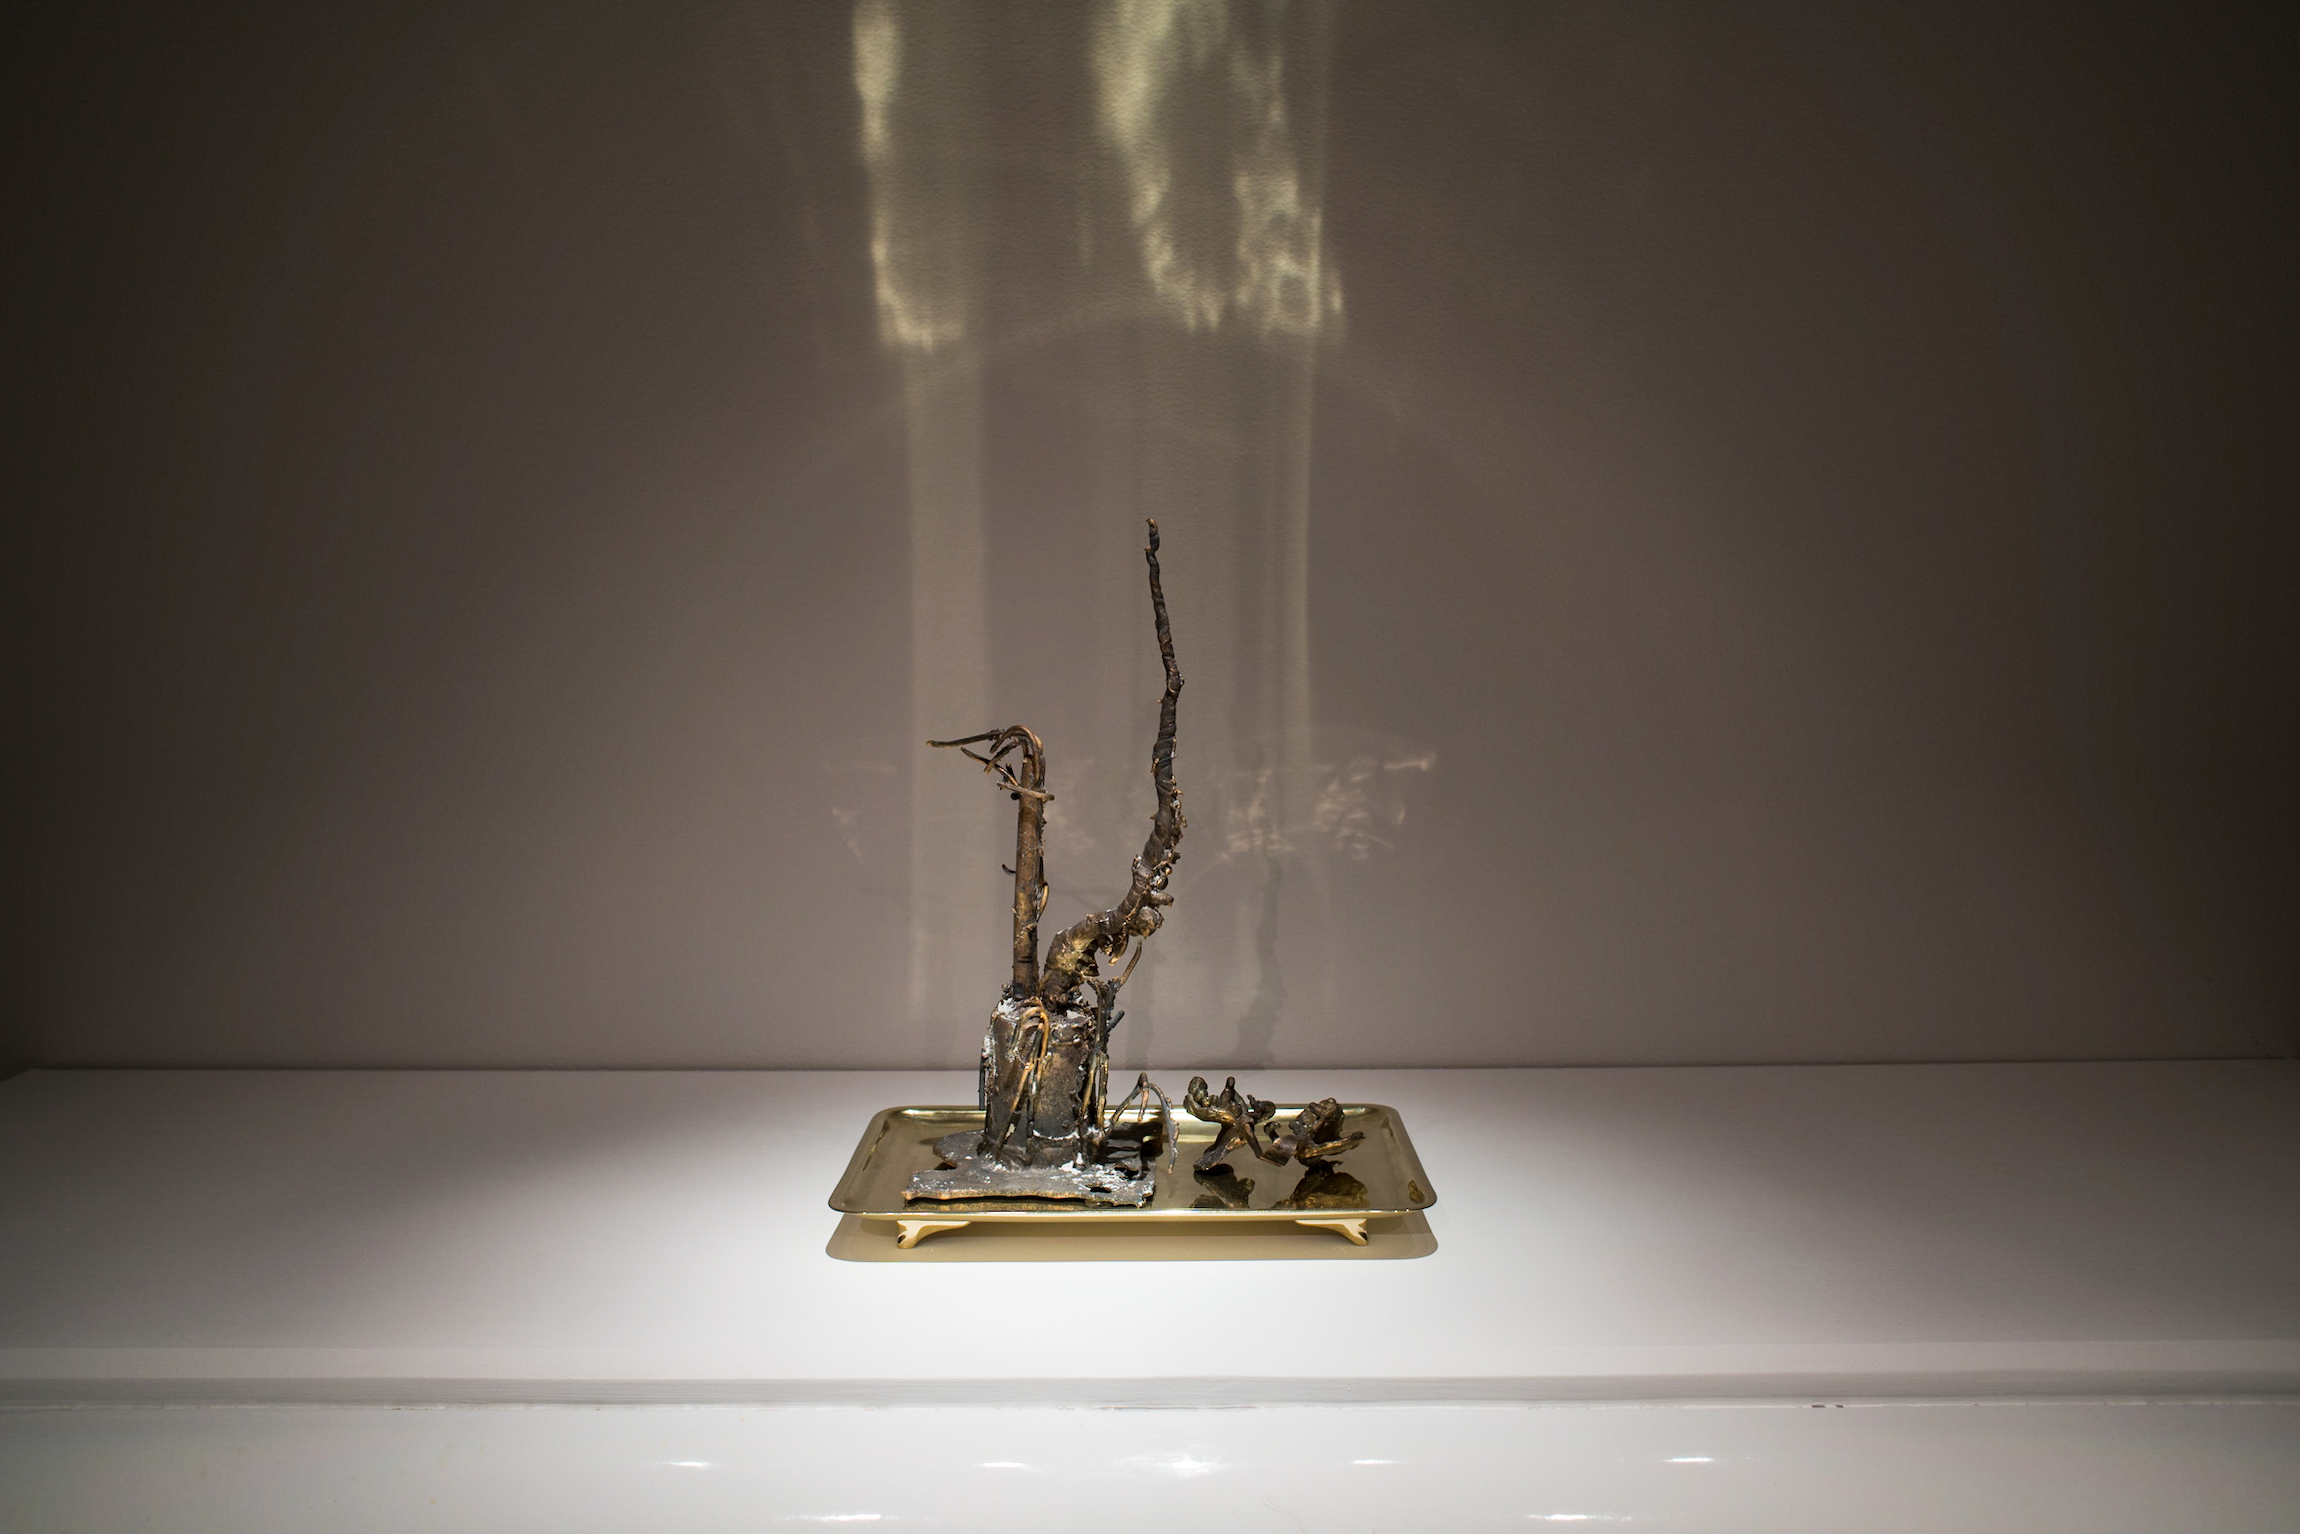 “Prop and Probe,” 2018-2019, Brass, bronze. Metalsmithing art from Chloe Darke's Master of Fine Arts exhibition Secrete, Augment, Testify at the Chazen Museum of Art, University of Wisconsin-Madison. Photography by Kyle Herrera.